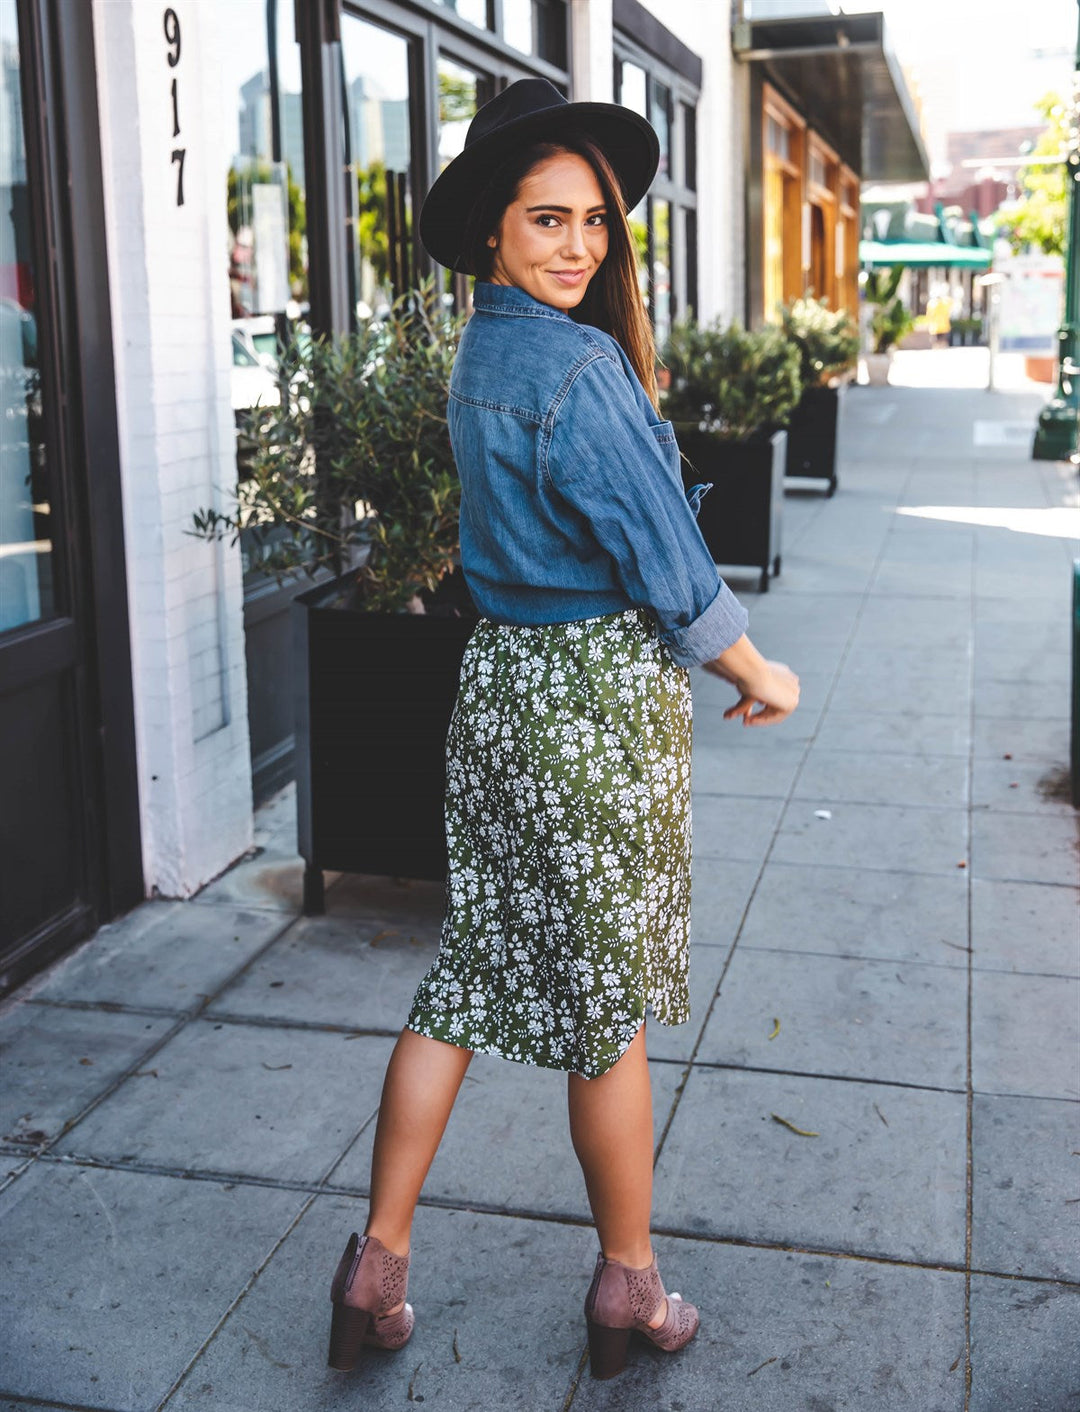 Dainty Floral Fiona Weekend Skirt